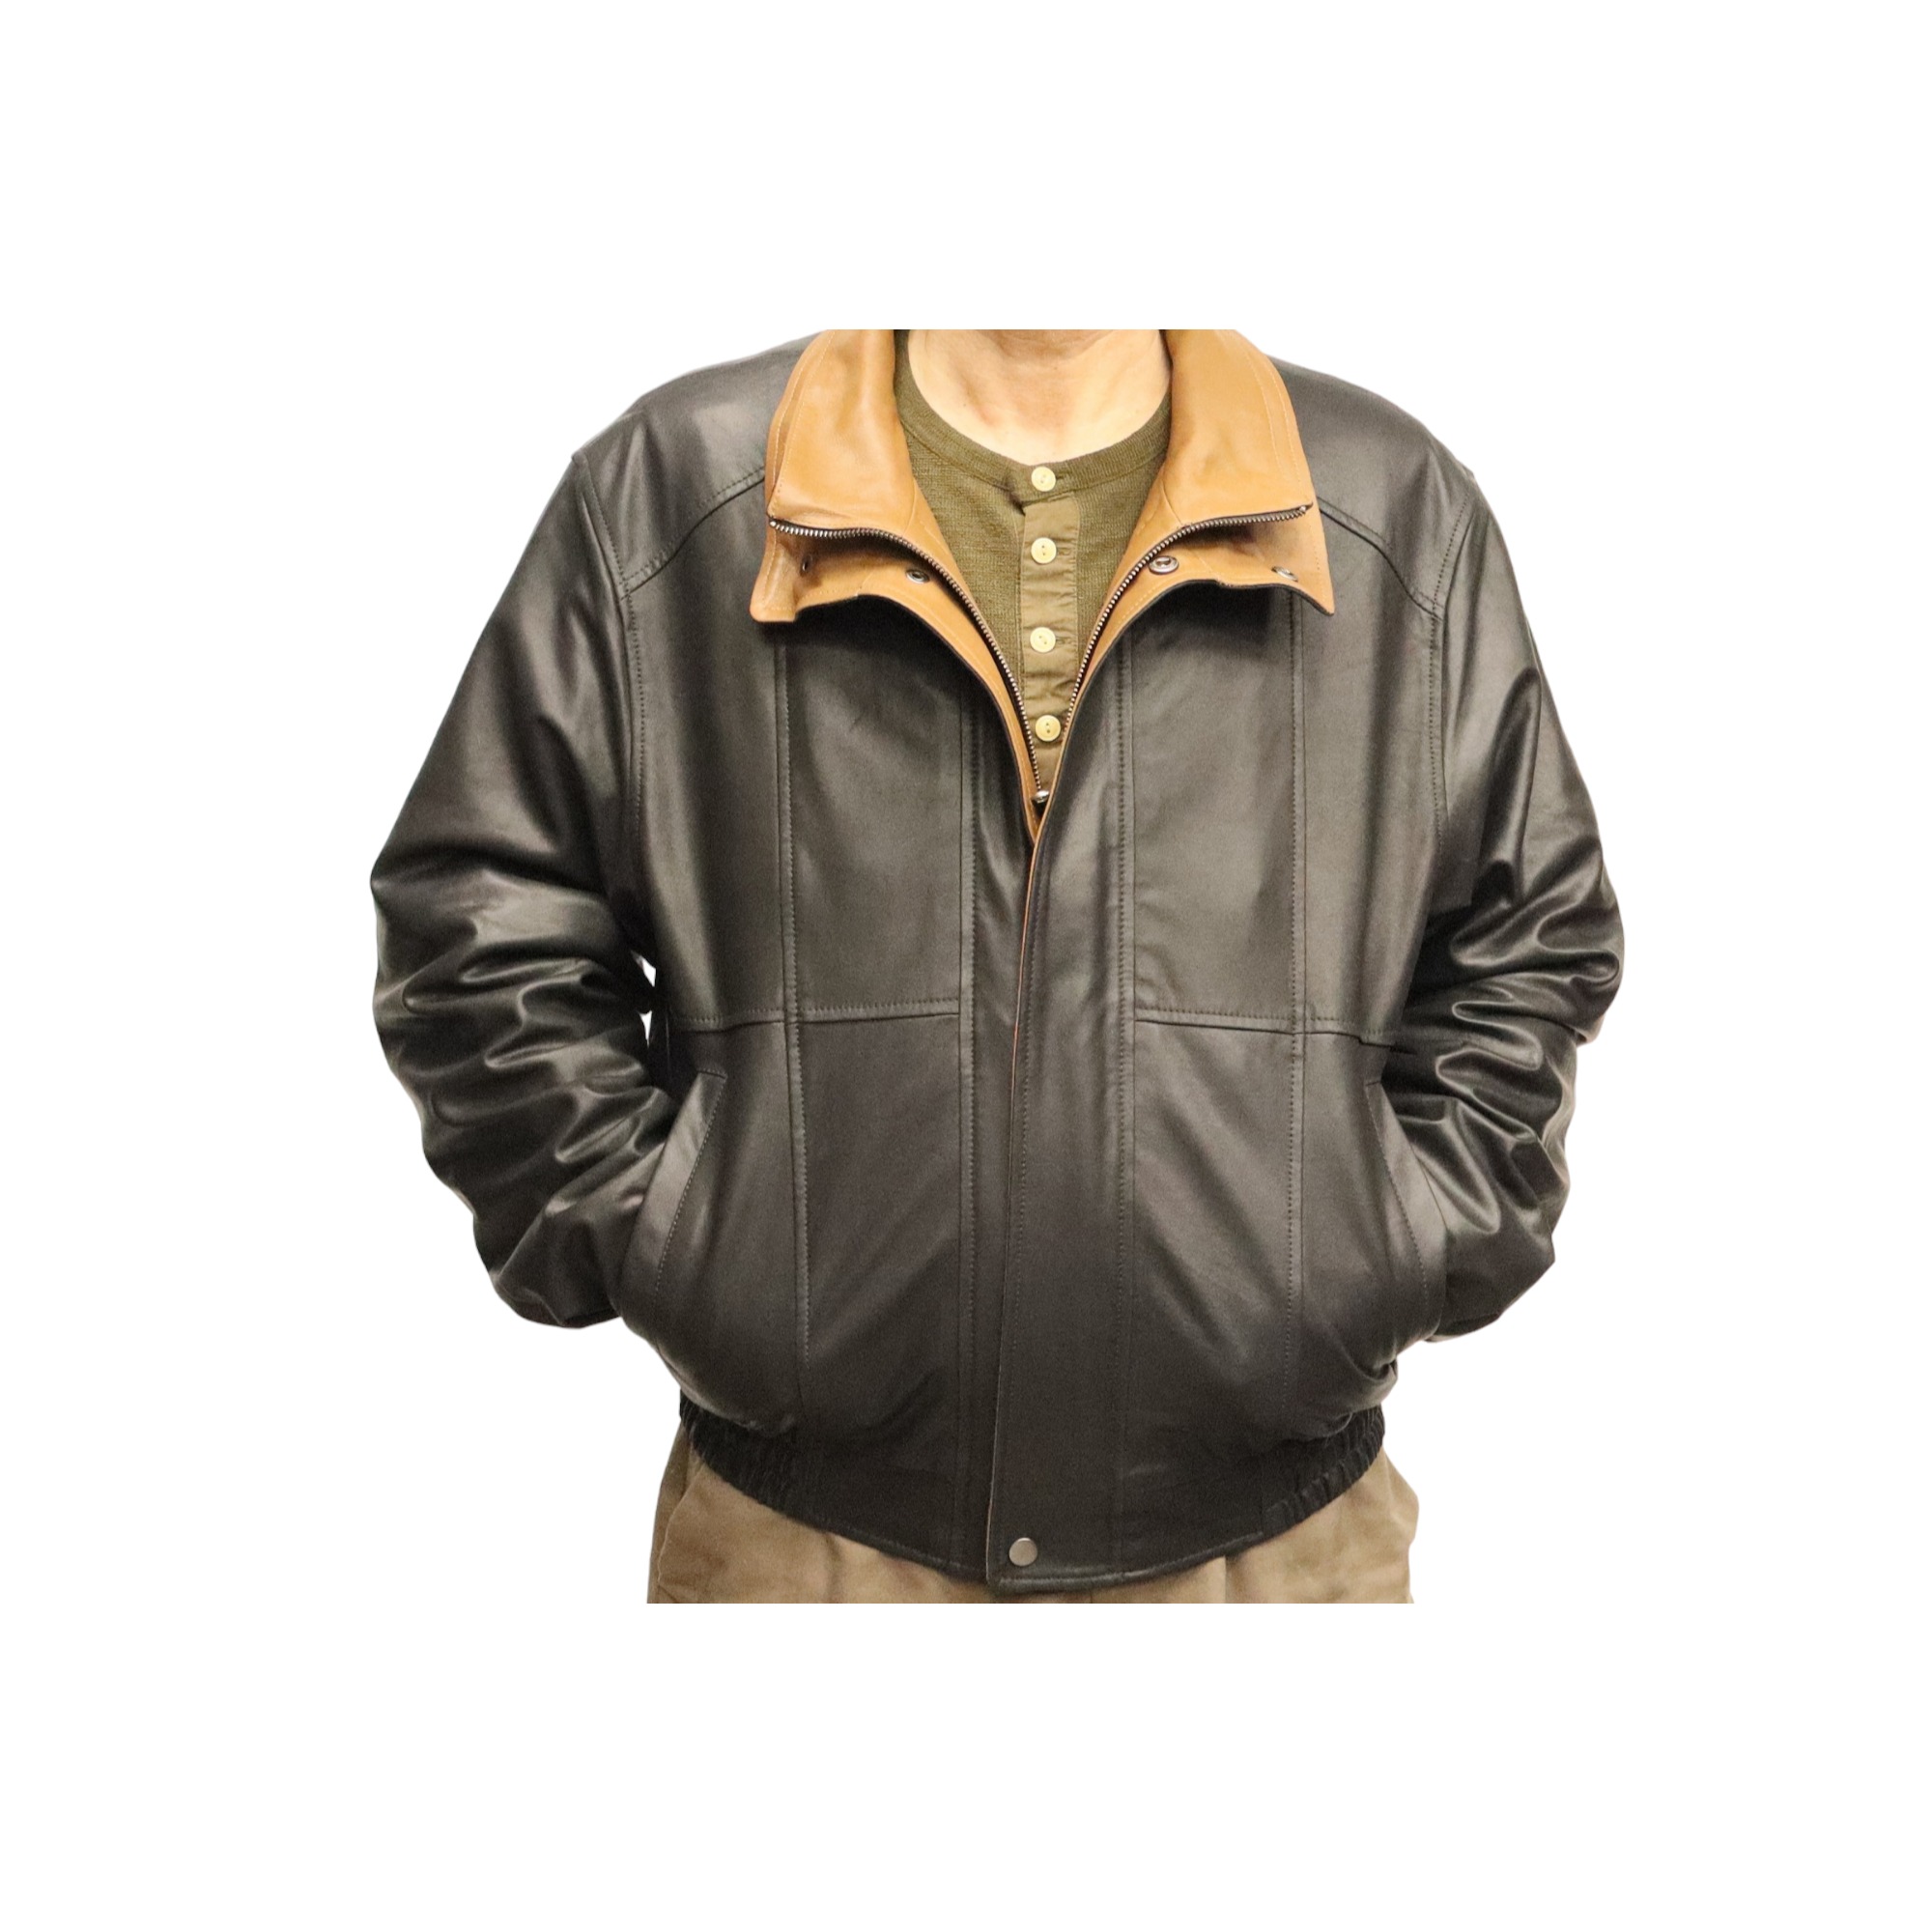 Mens double collar leather jacket